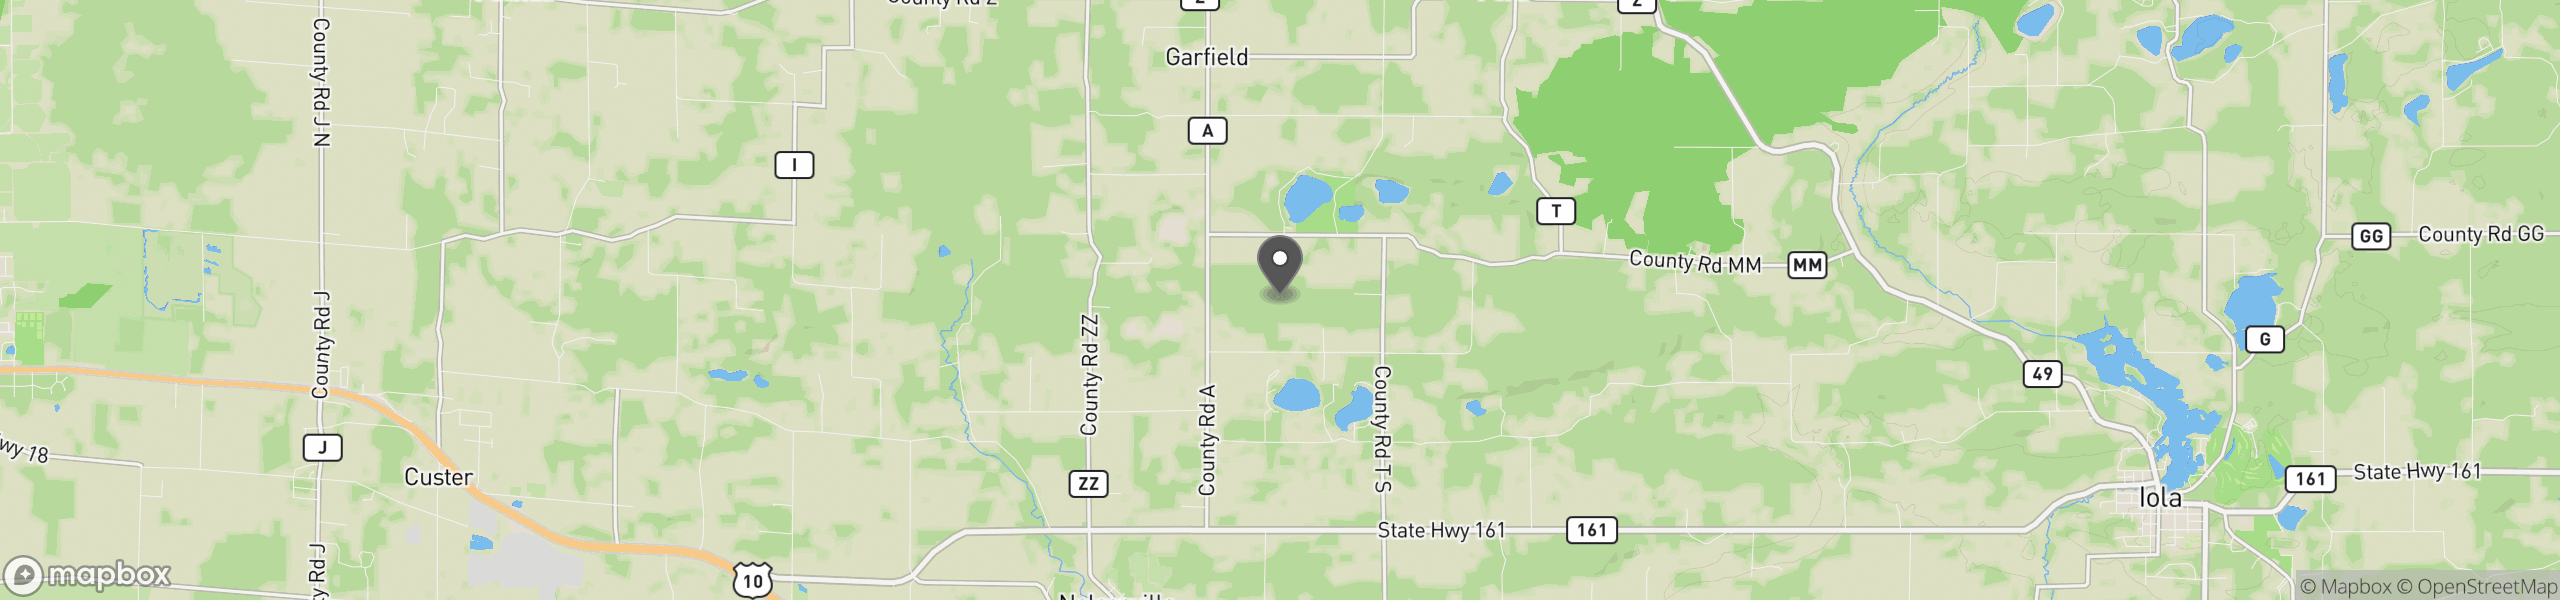 Amherst Junction, WI 54407